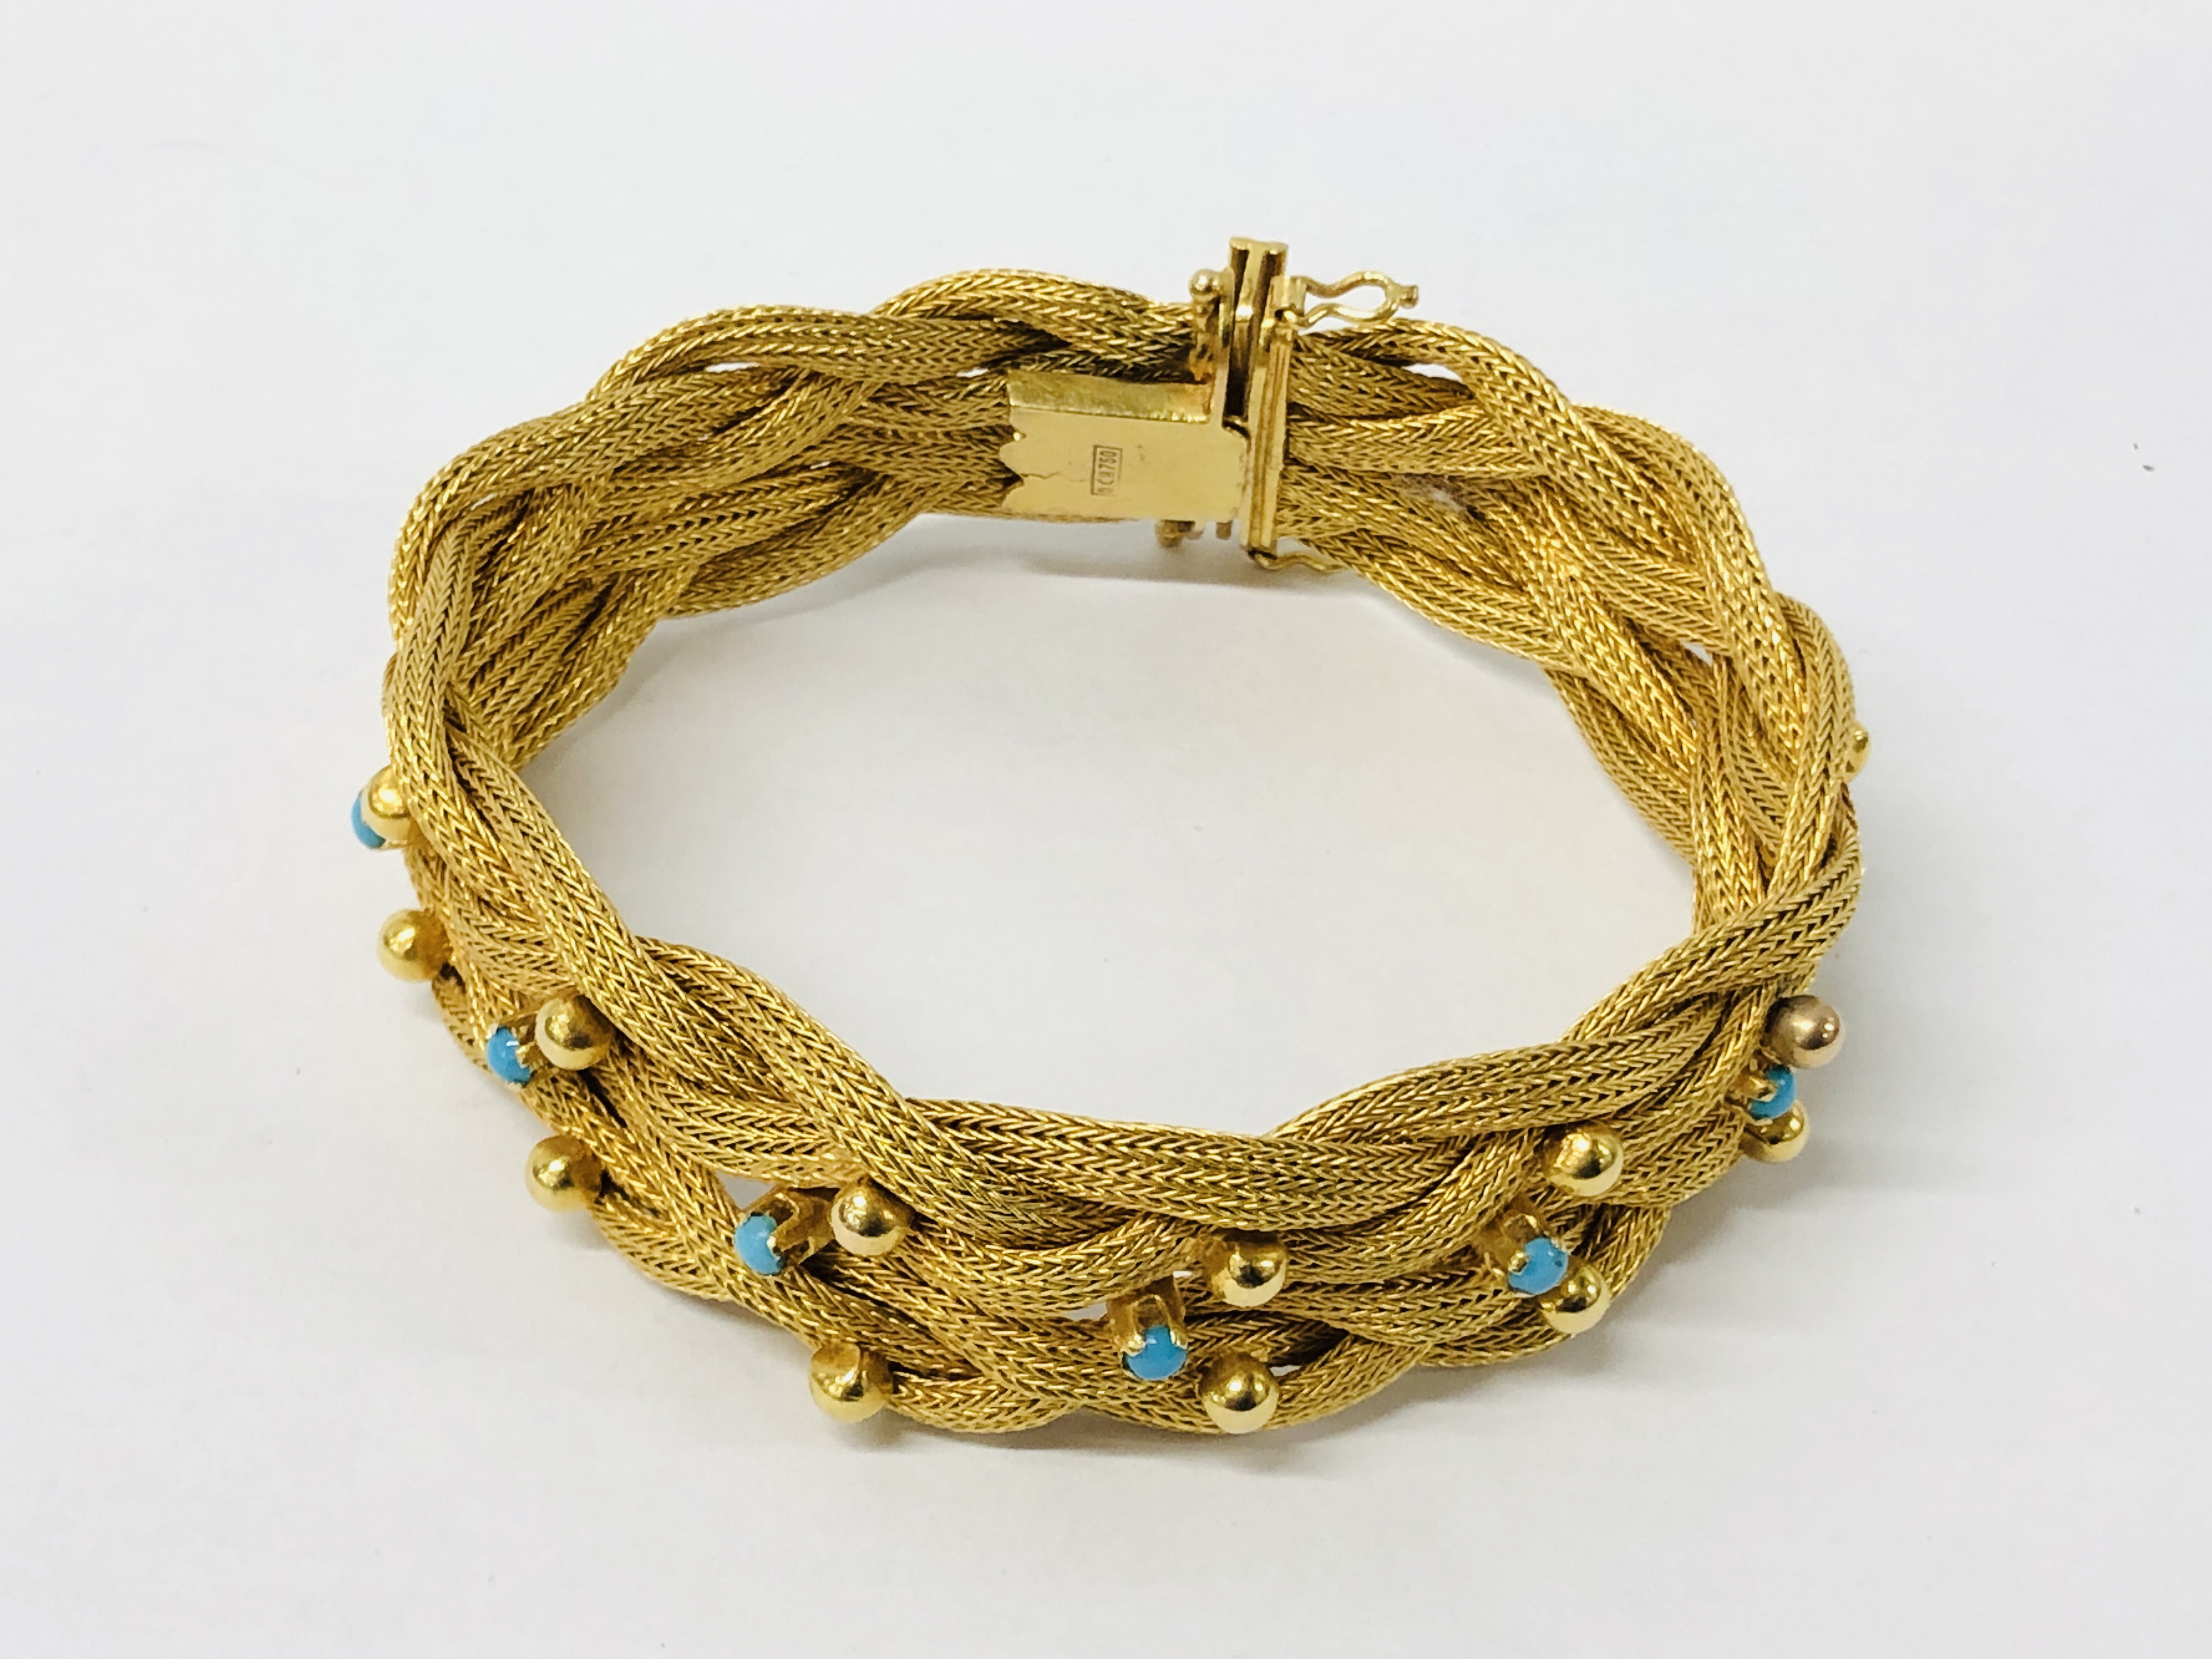 A ROPE TWIST BRACELET SET WITH TINY TURQUOISE STONES, THE CLASP MARKED 750. - Image 3 of 10